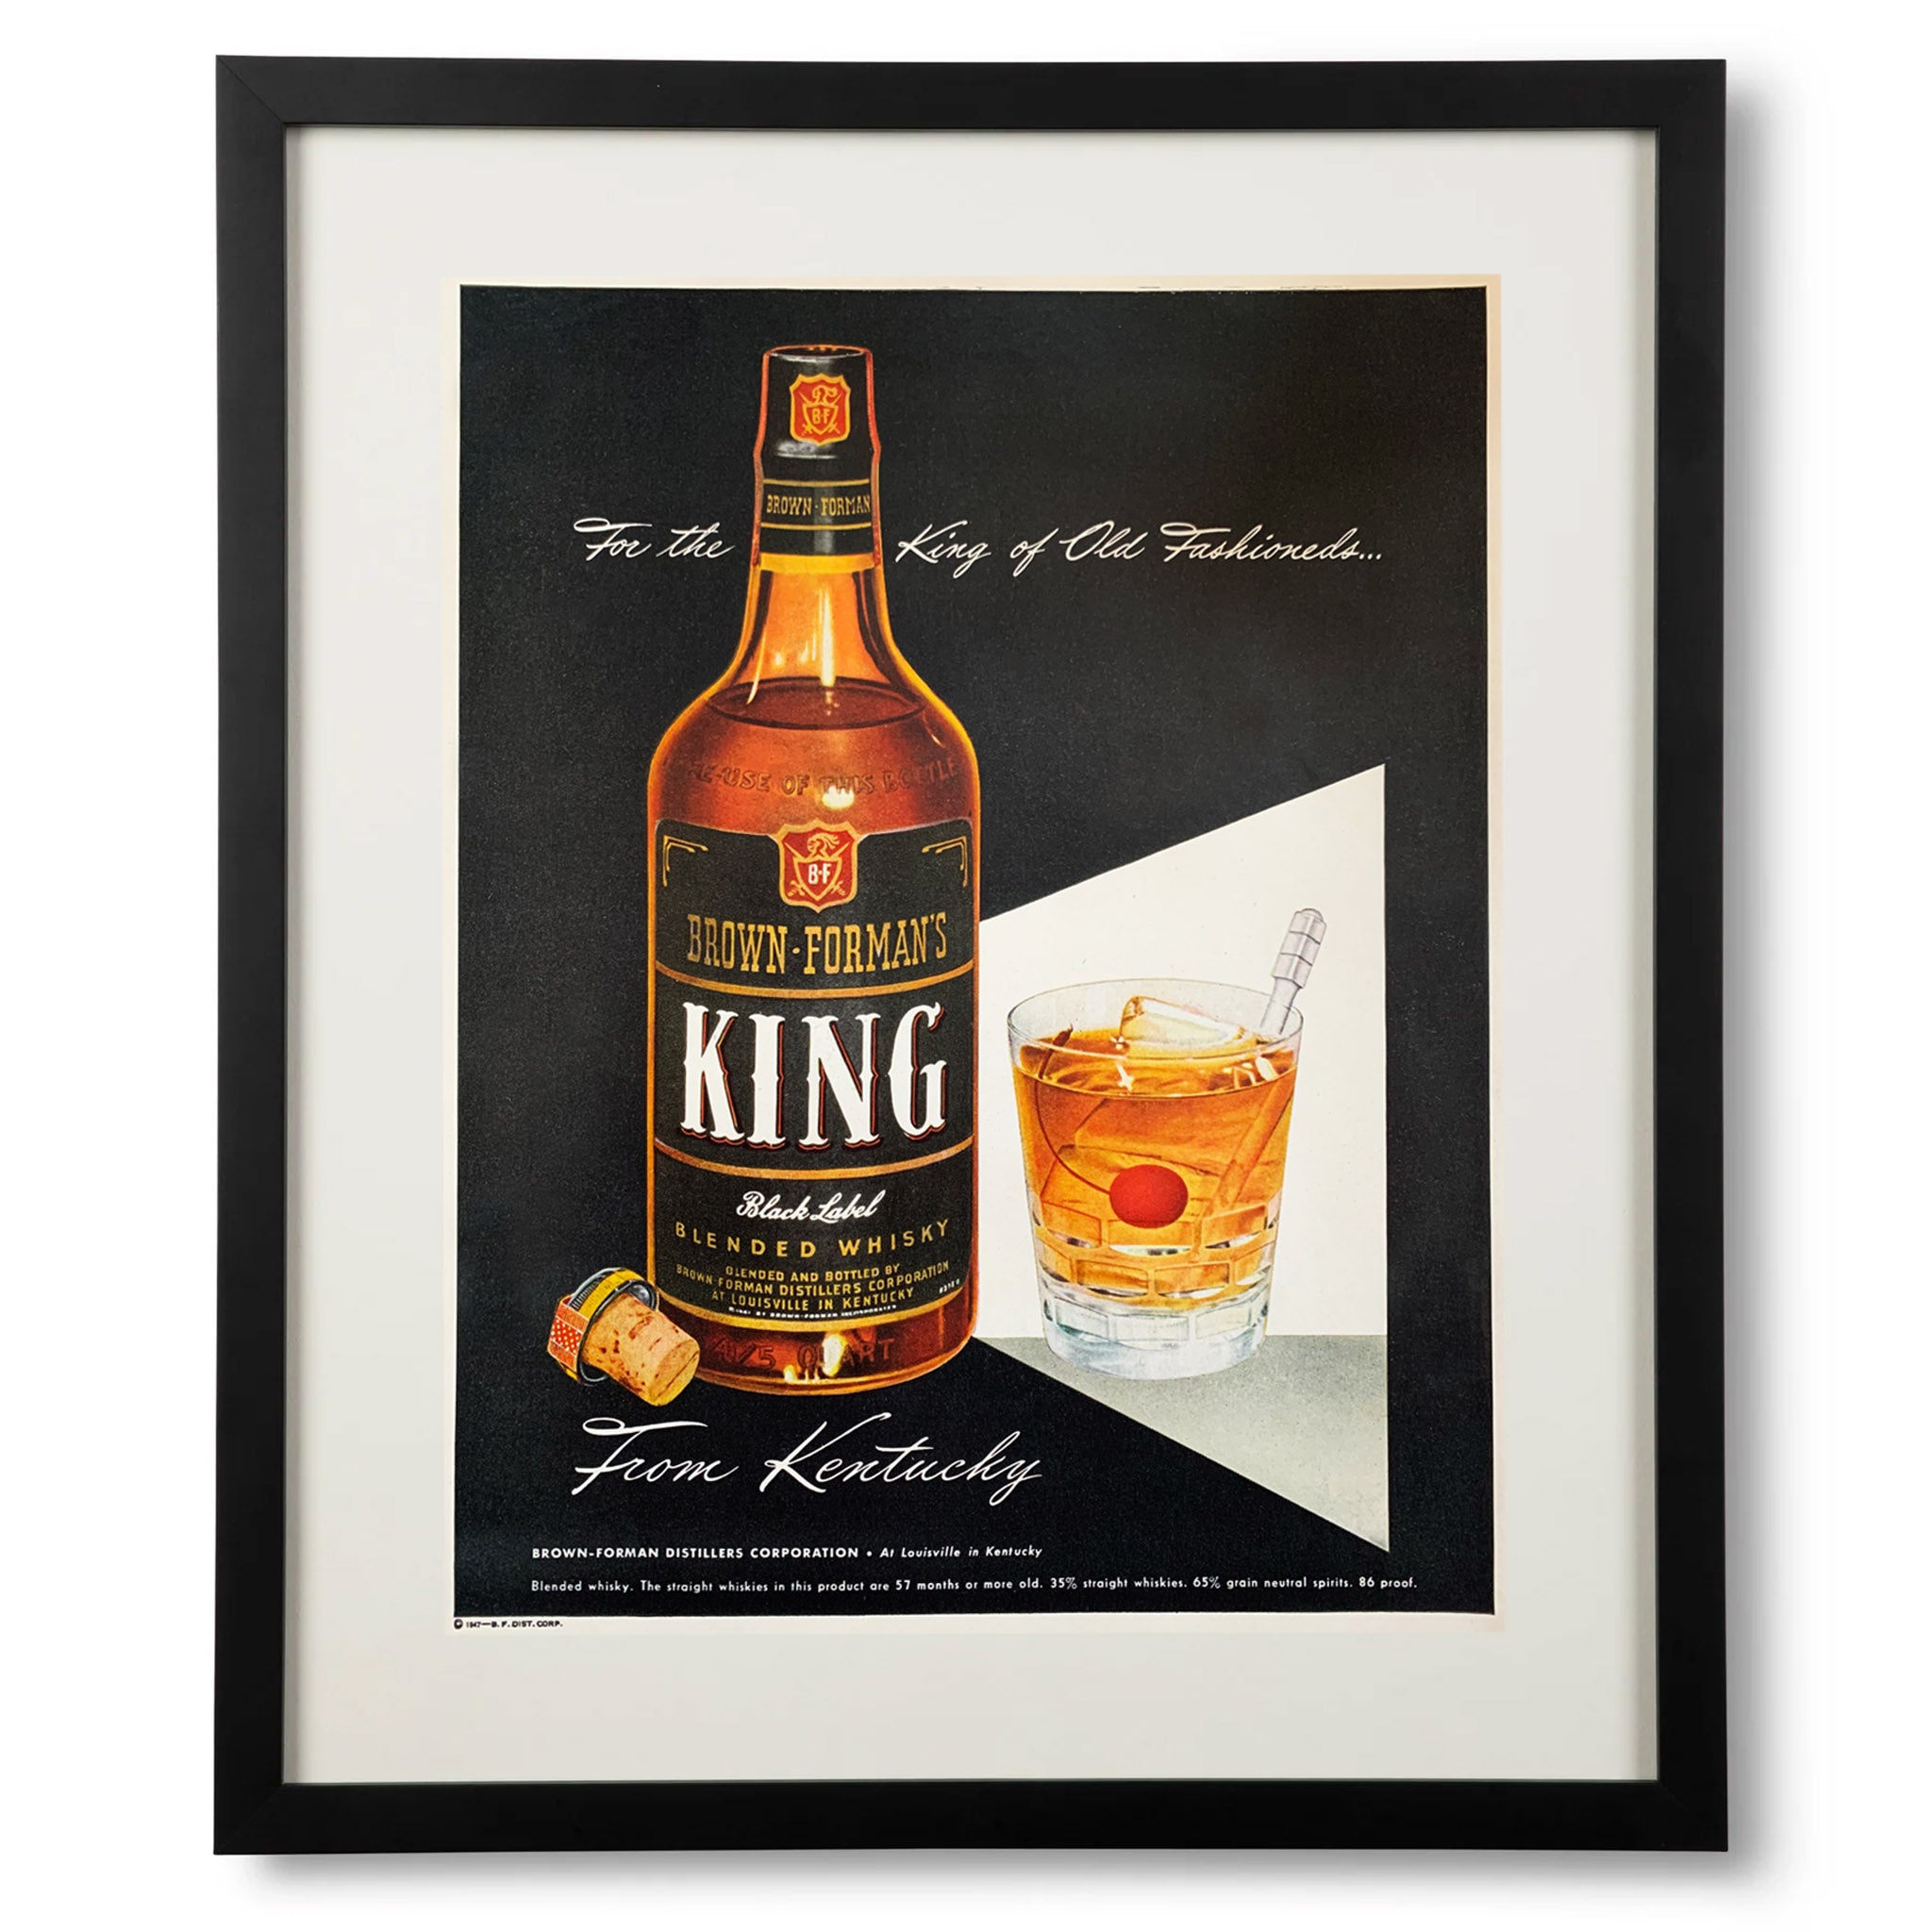 Framed King of Old Fashioneds Whiskey Ad